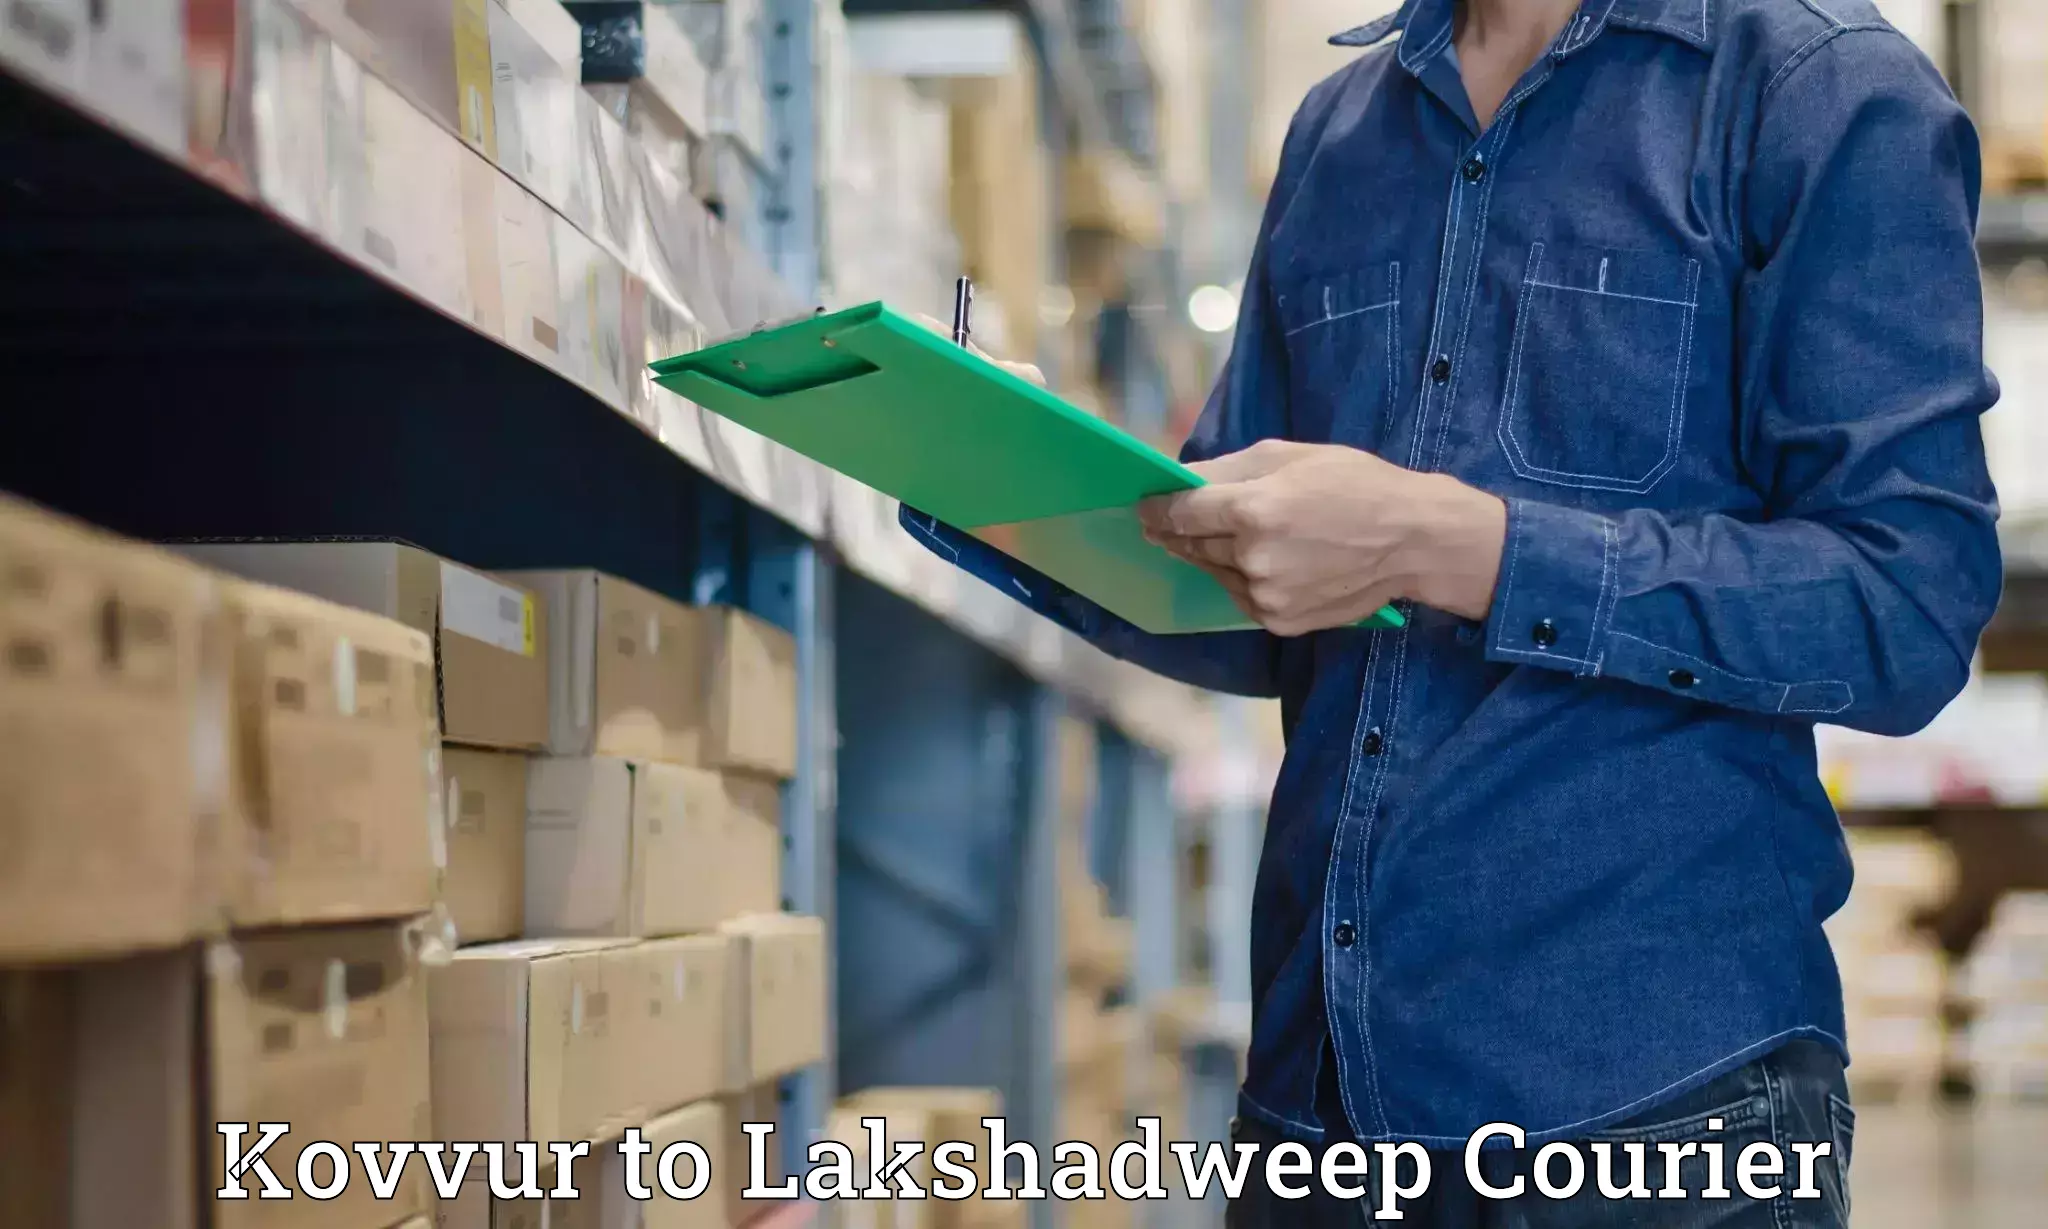 Professional parcel services Kovvur to Lakshadweep